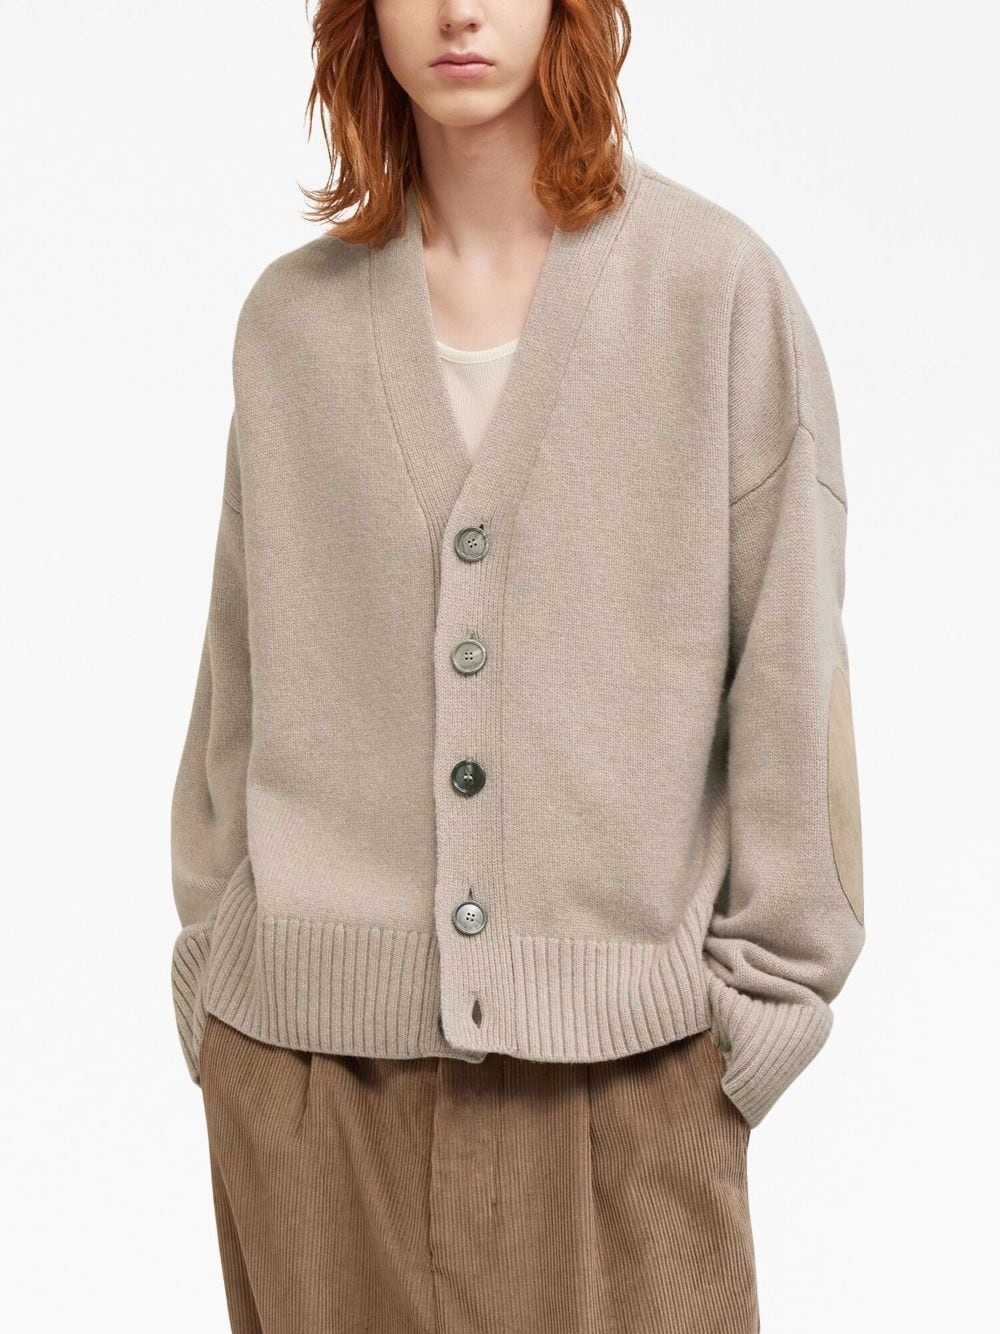 V-neck elbow patches cardigan - 4